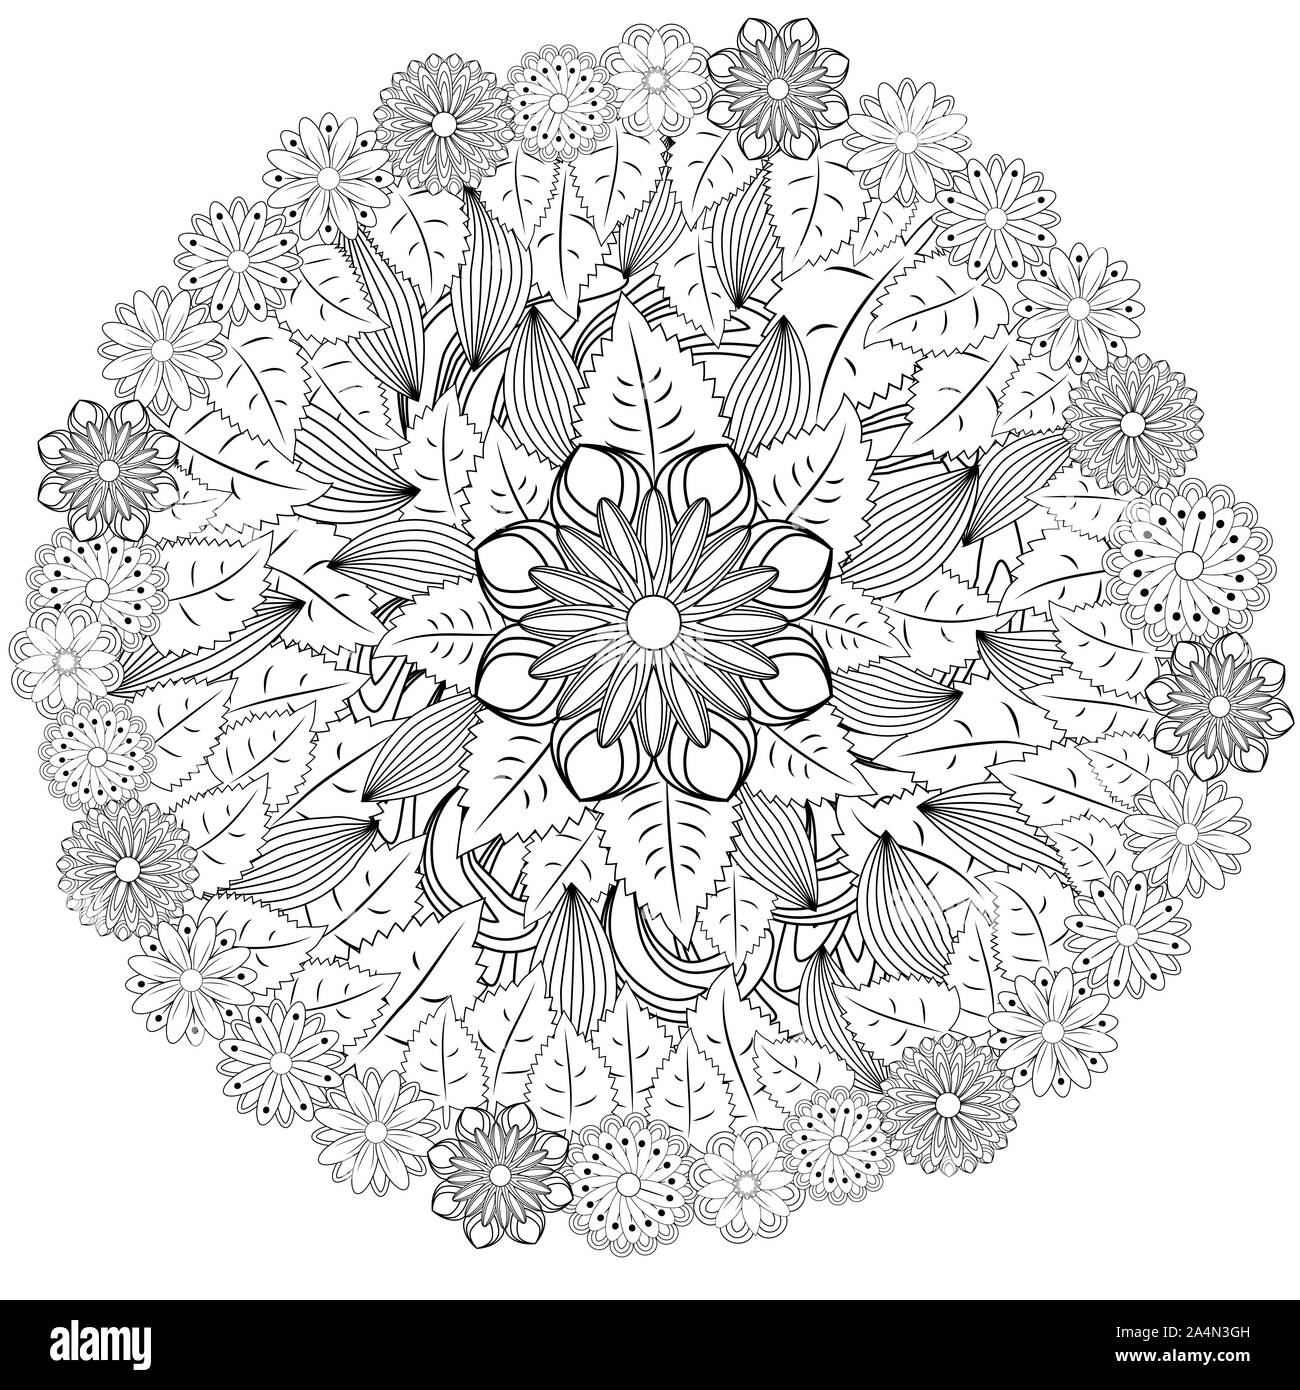 Ink Circles Lace Flowers